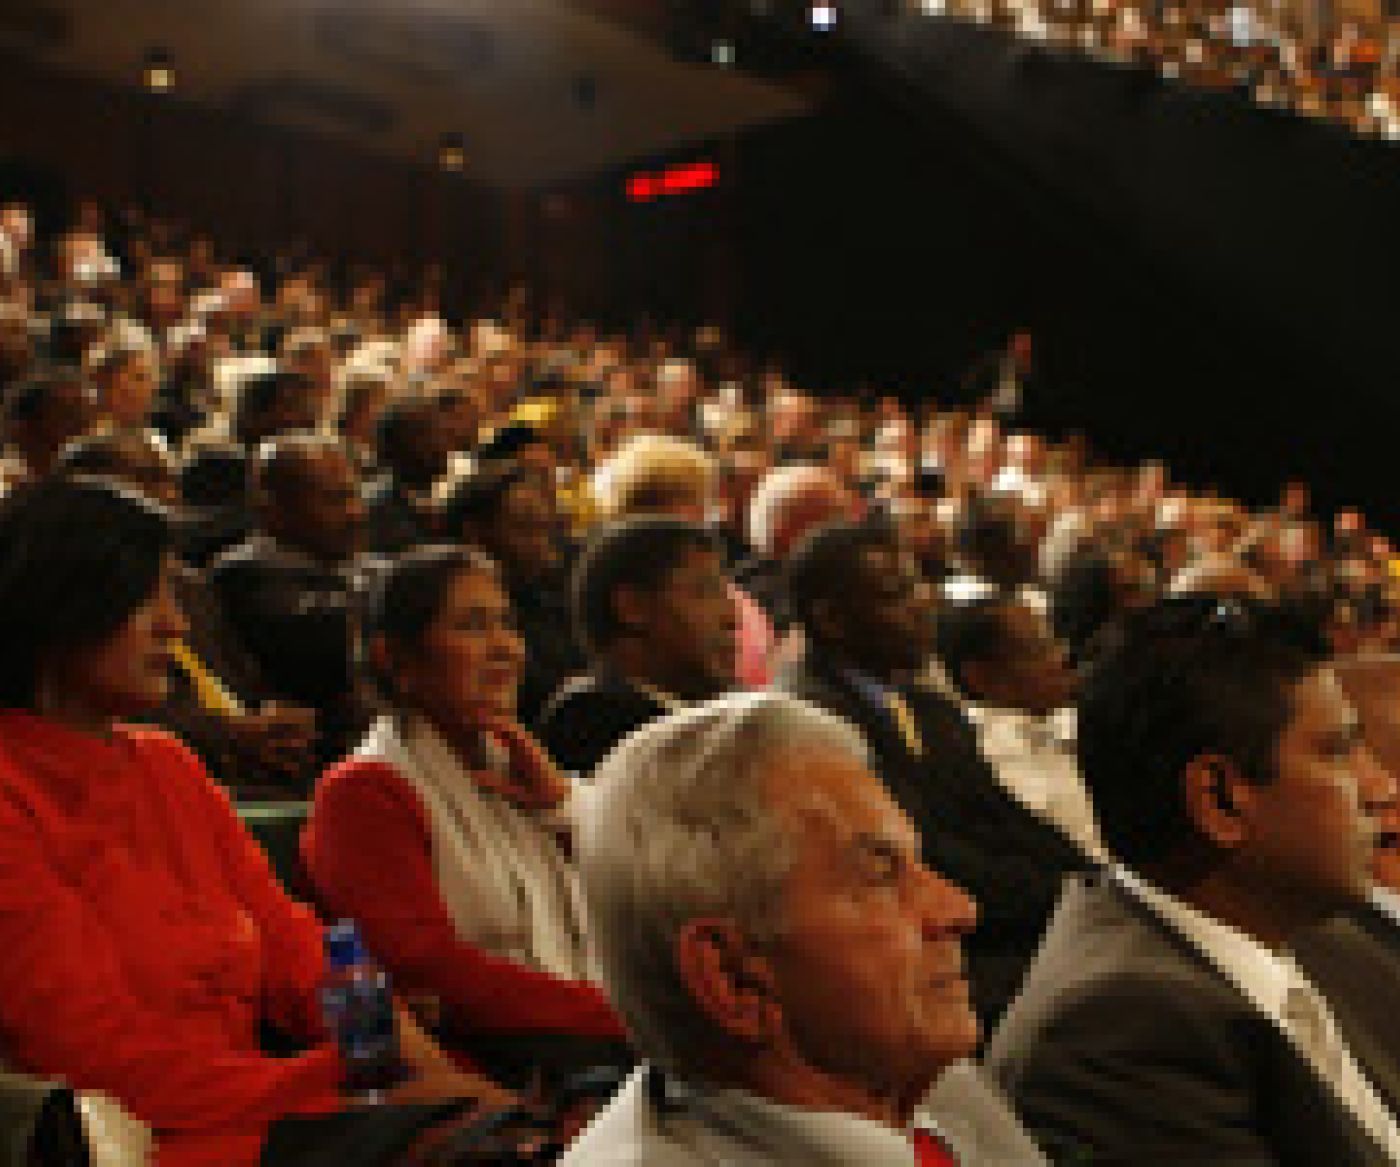 Audience at the 5th Nelson Mandela Annual Lecture